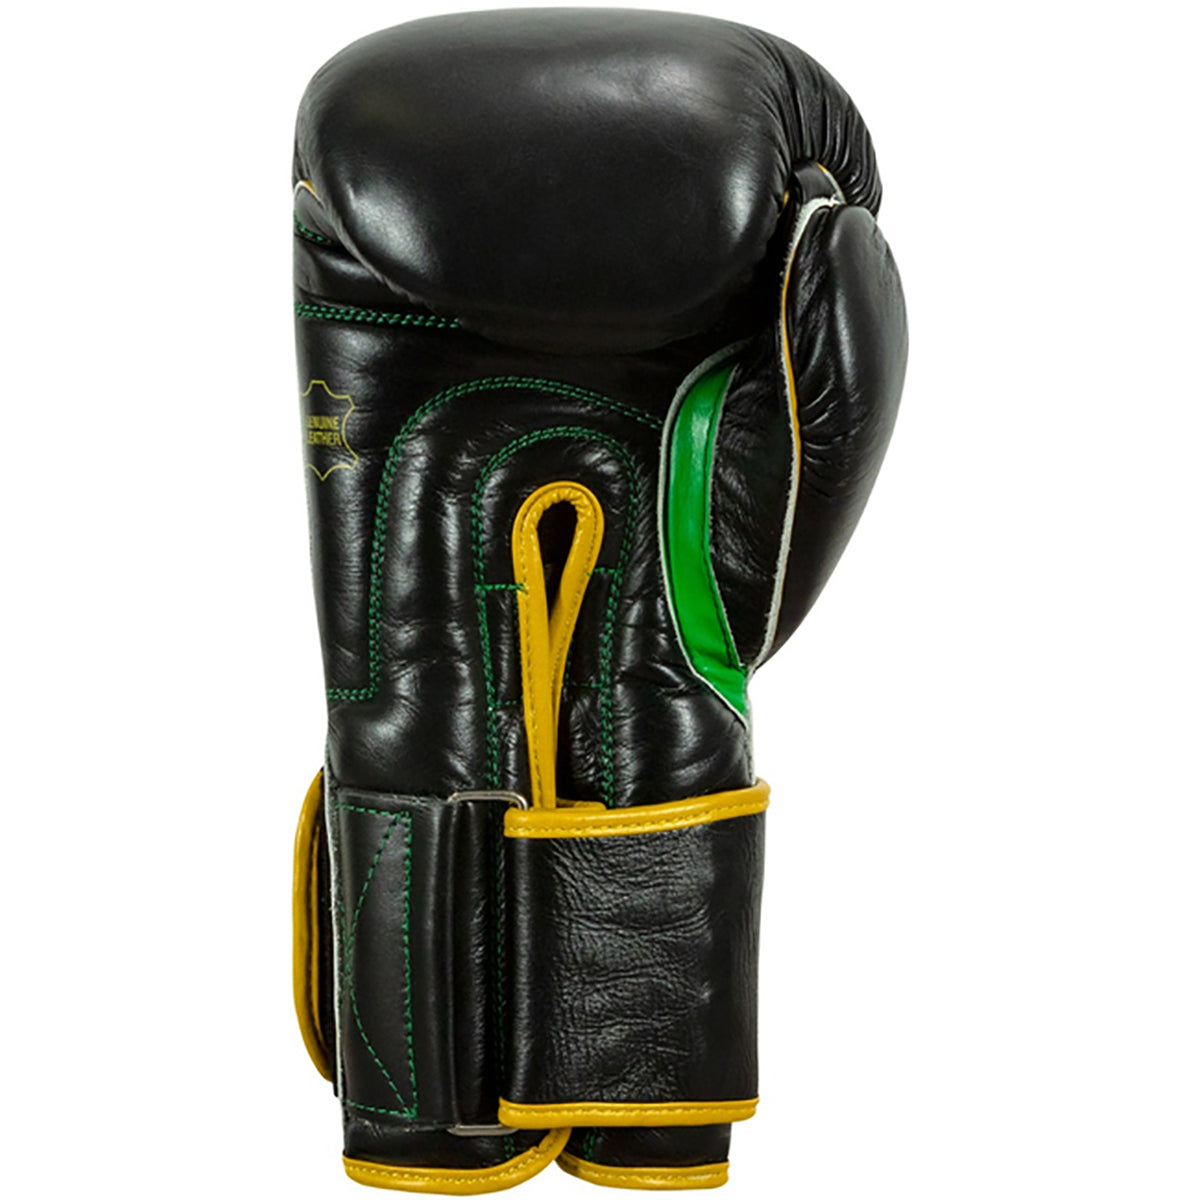 Title Boxing WBC Hook and Loop Bag Gloves - Black/Green Title Boxing